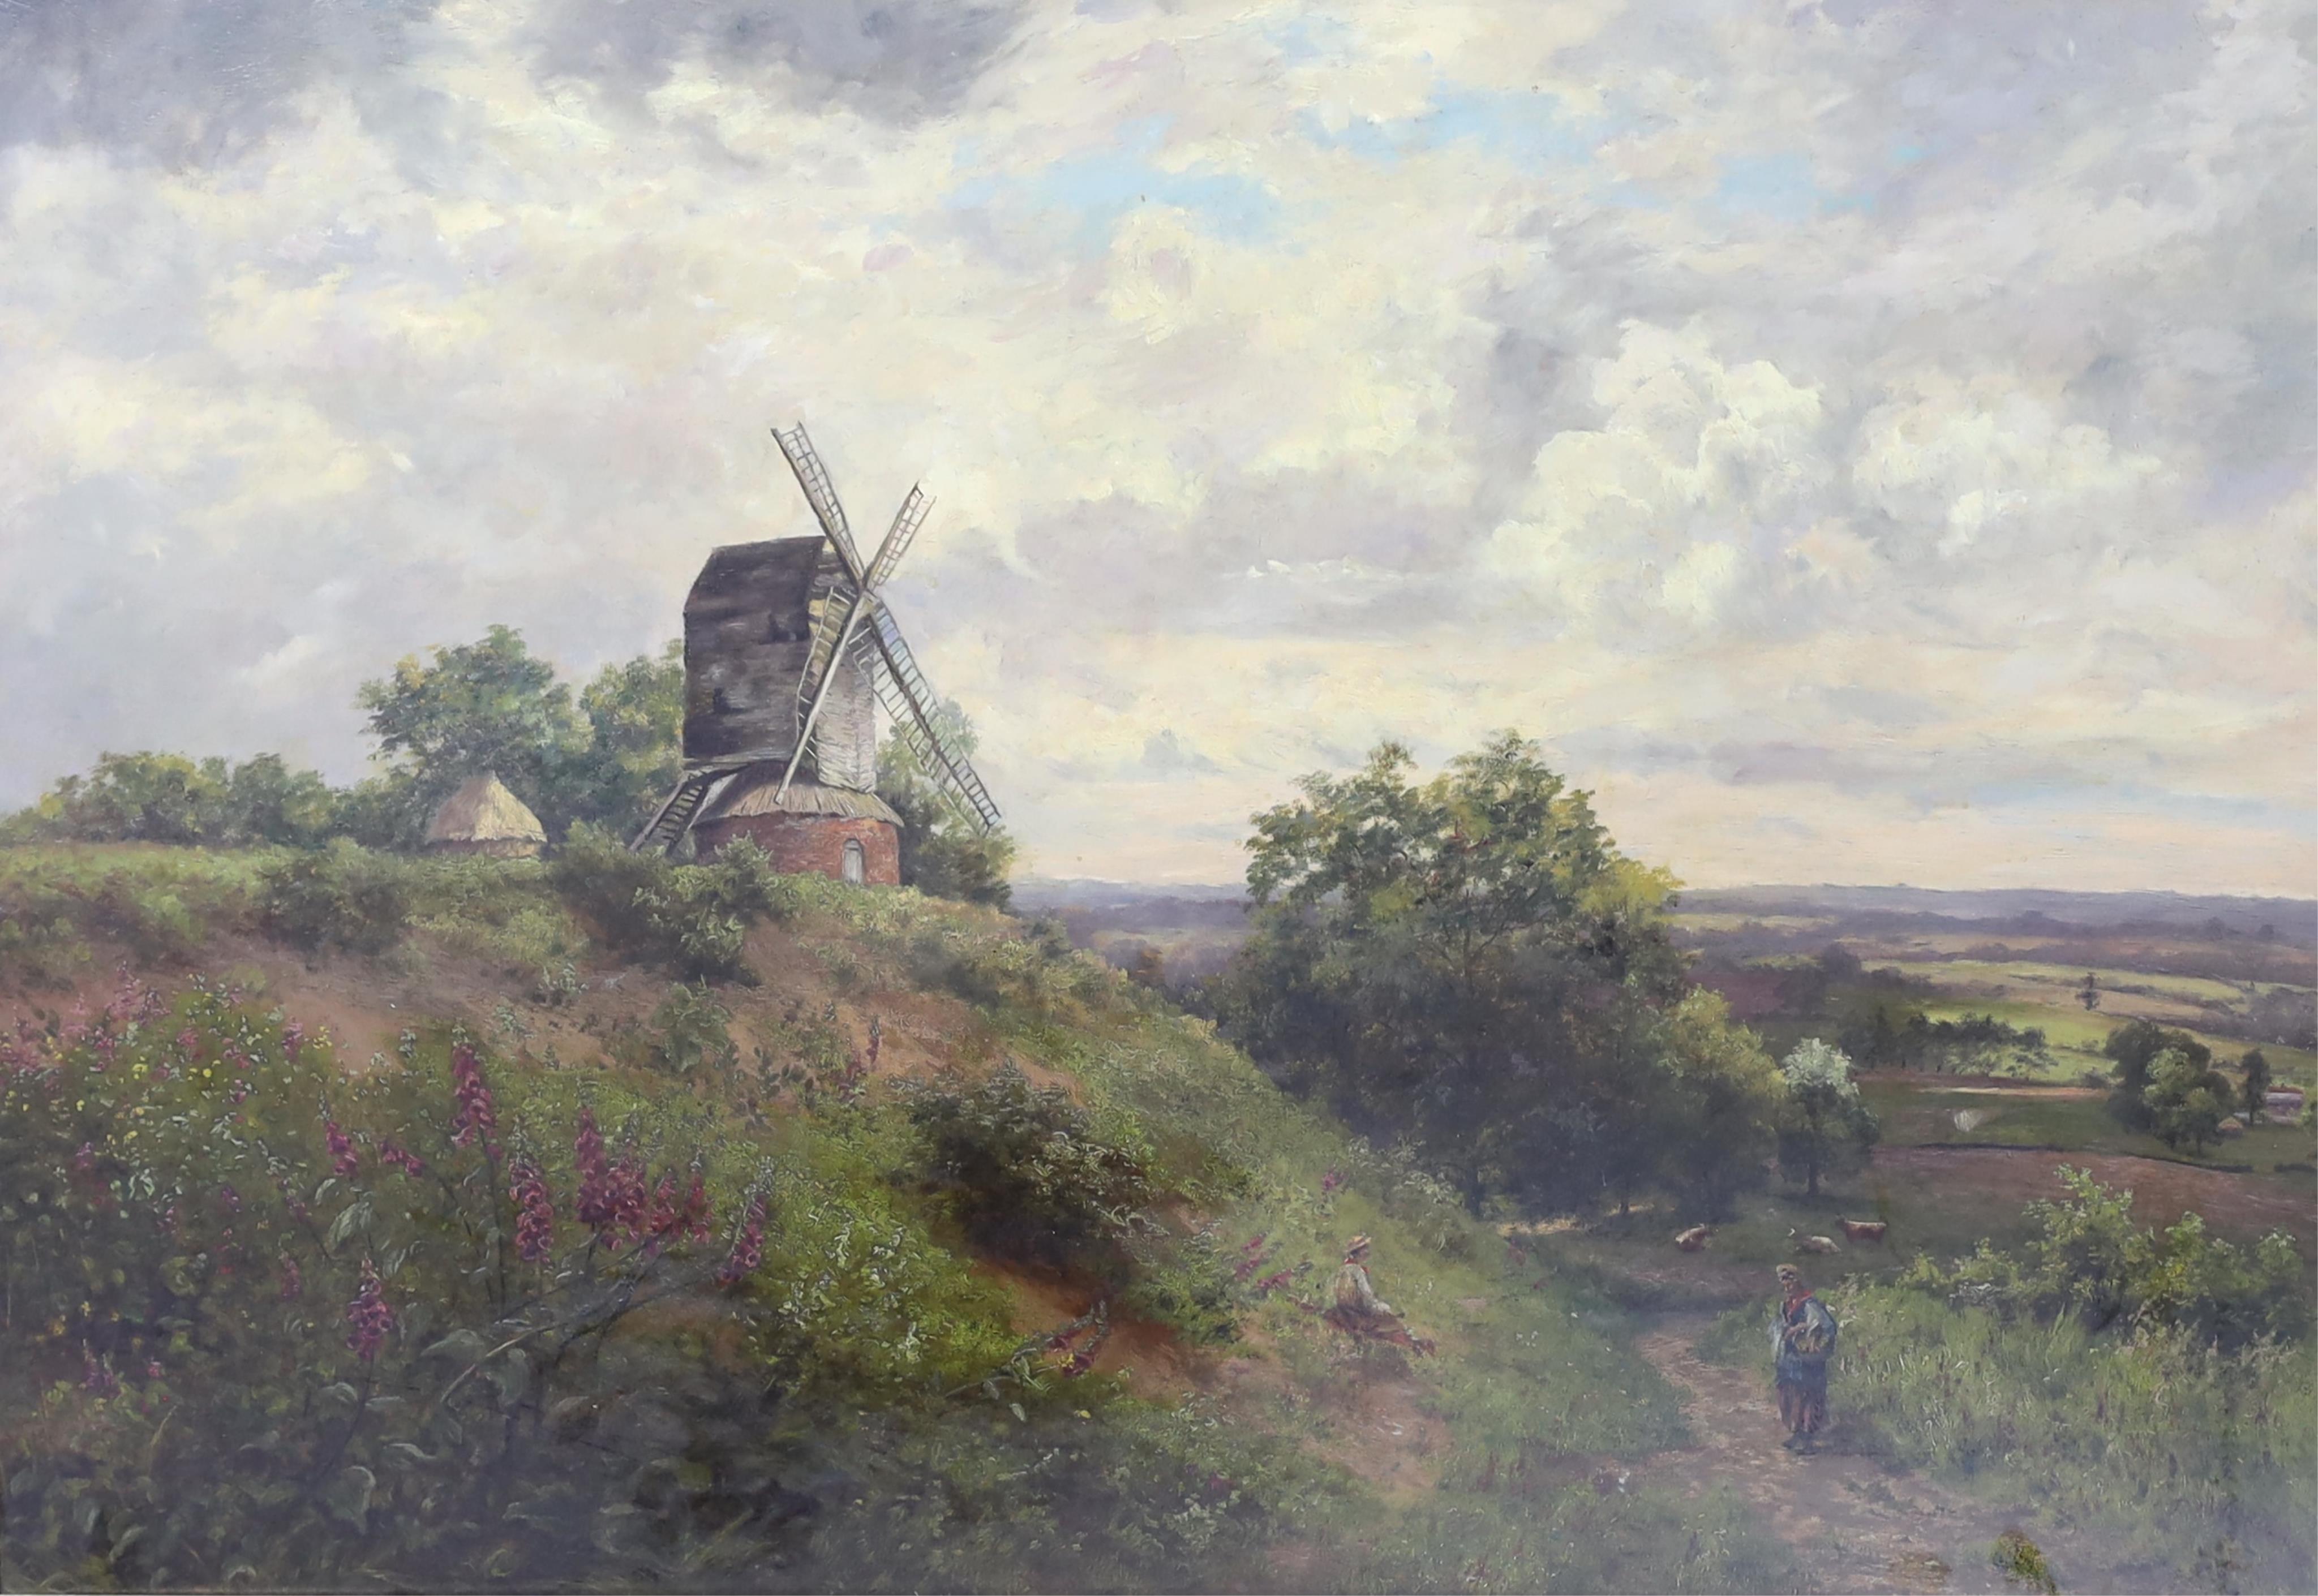 J F Wilkinson (19th. C), oil on canvas, 'Mid Surrey Hill', signed, 67 x 97cm. Condition - fair, restored and relined